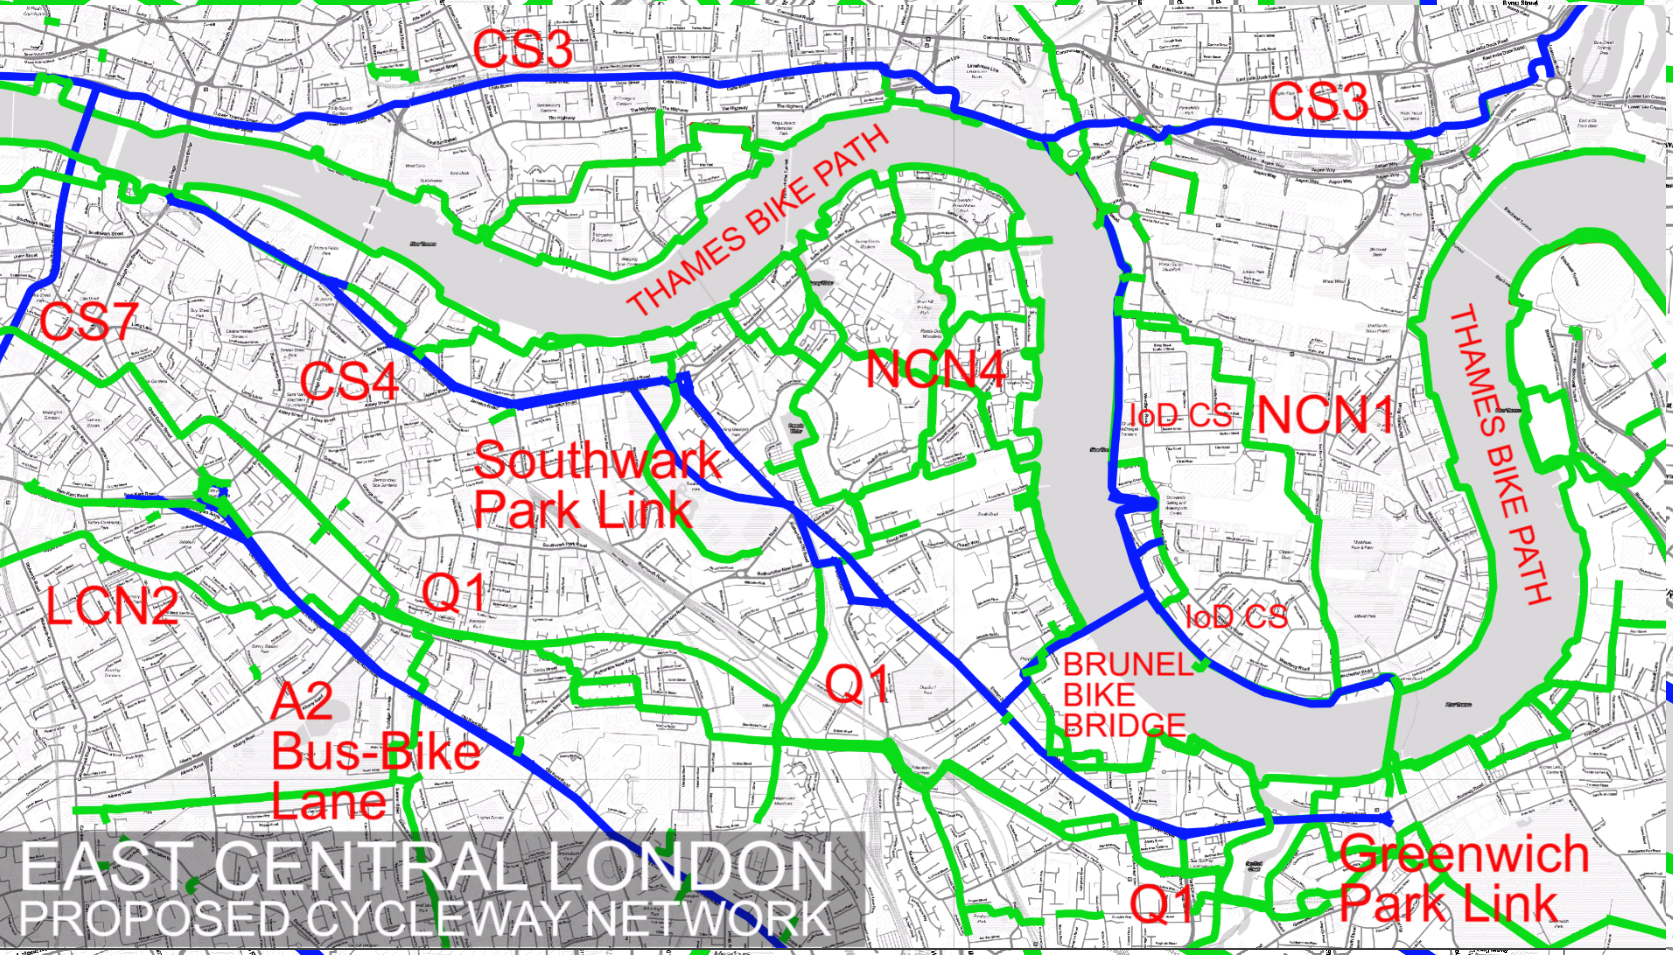 East Central London needs a cycle route network